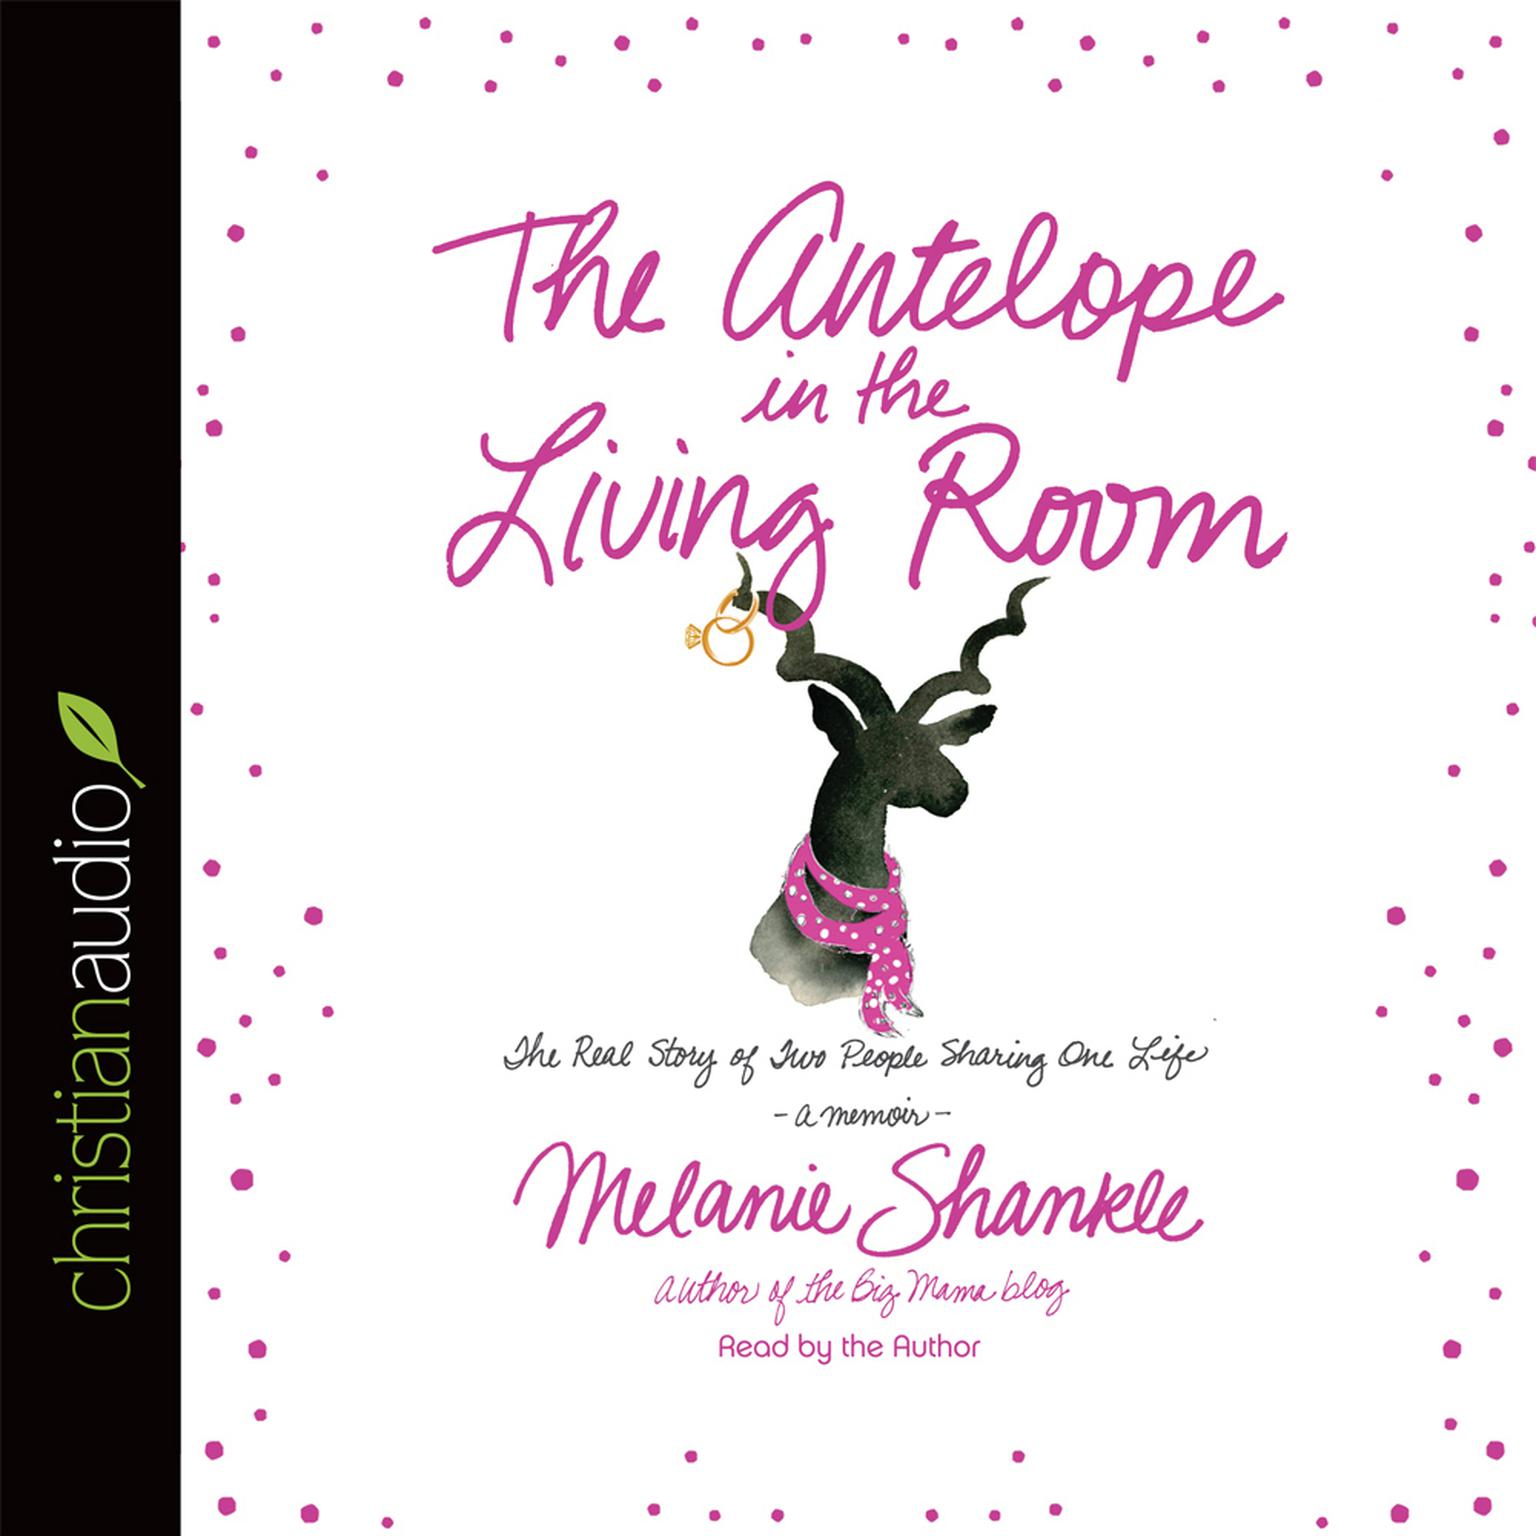 Antelope in the Living Room: The Real Story of Two People Sharing One Life Audiobook, by Melanie Shankle